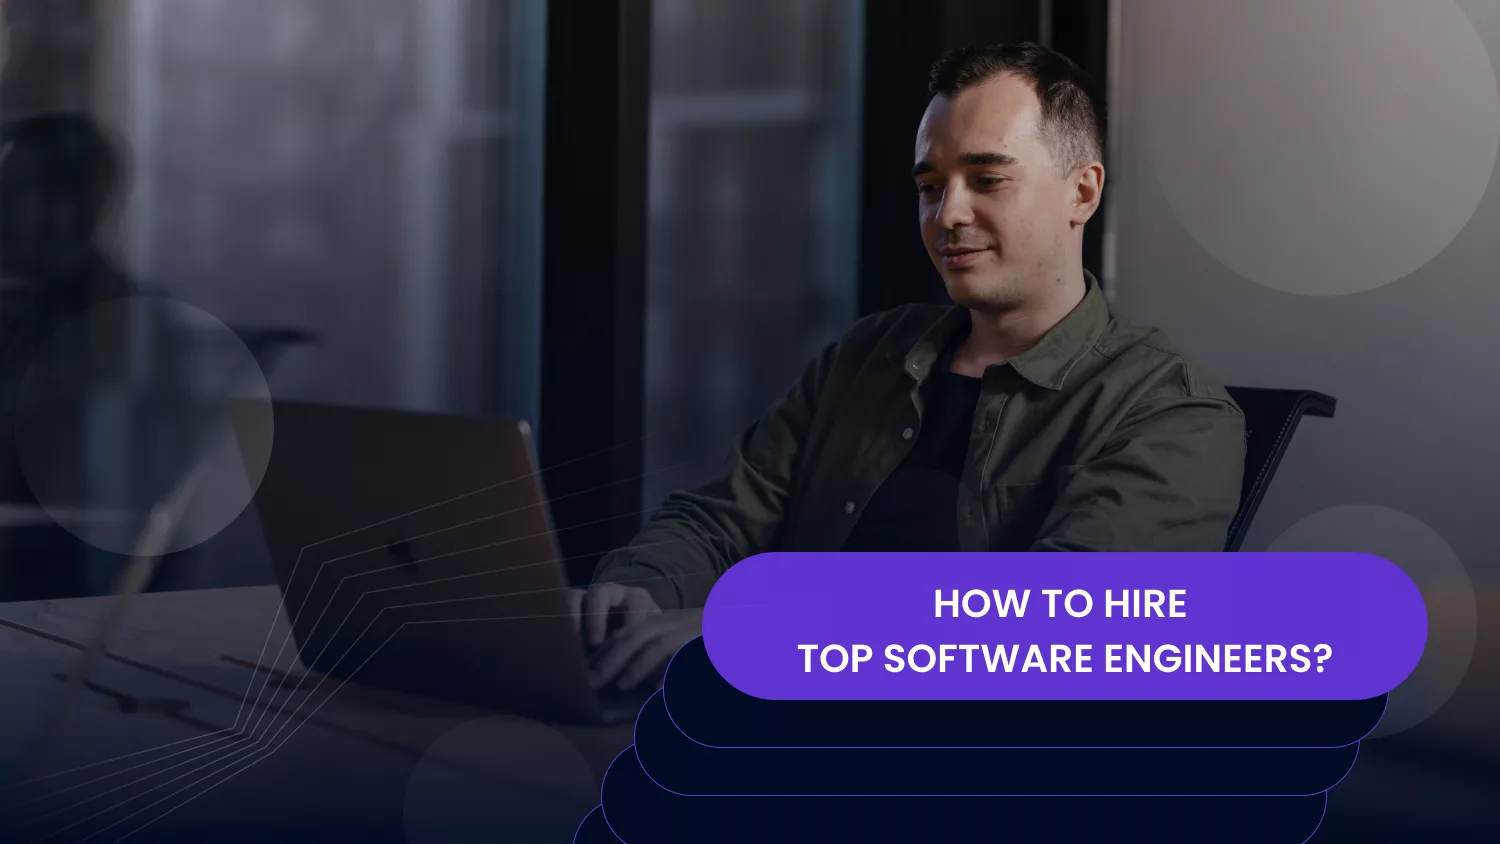 How to hire top software engineers